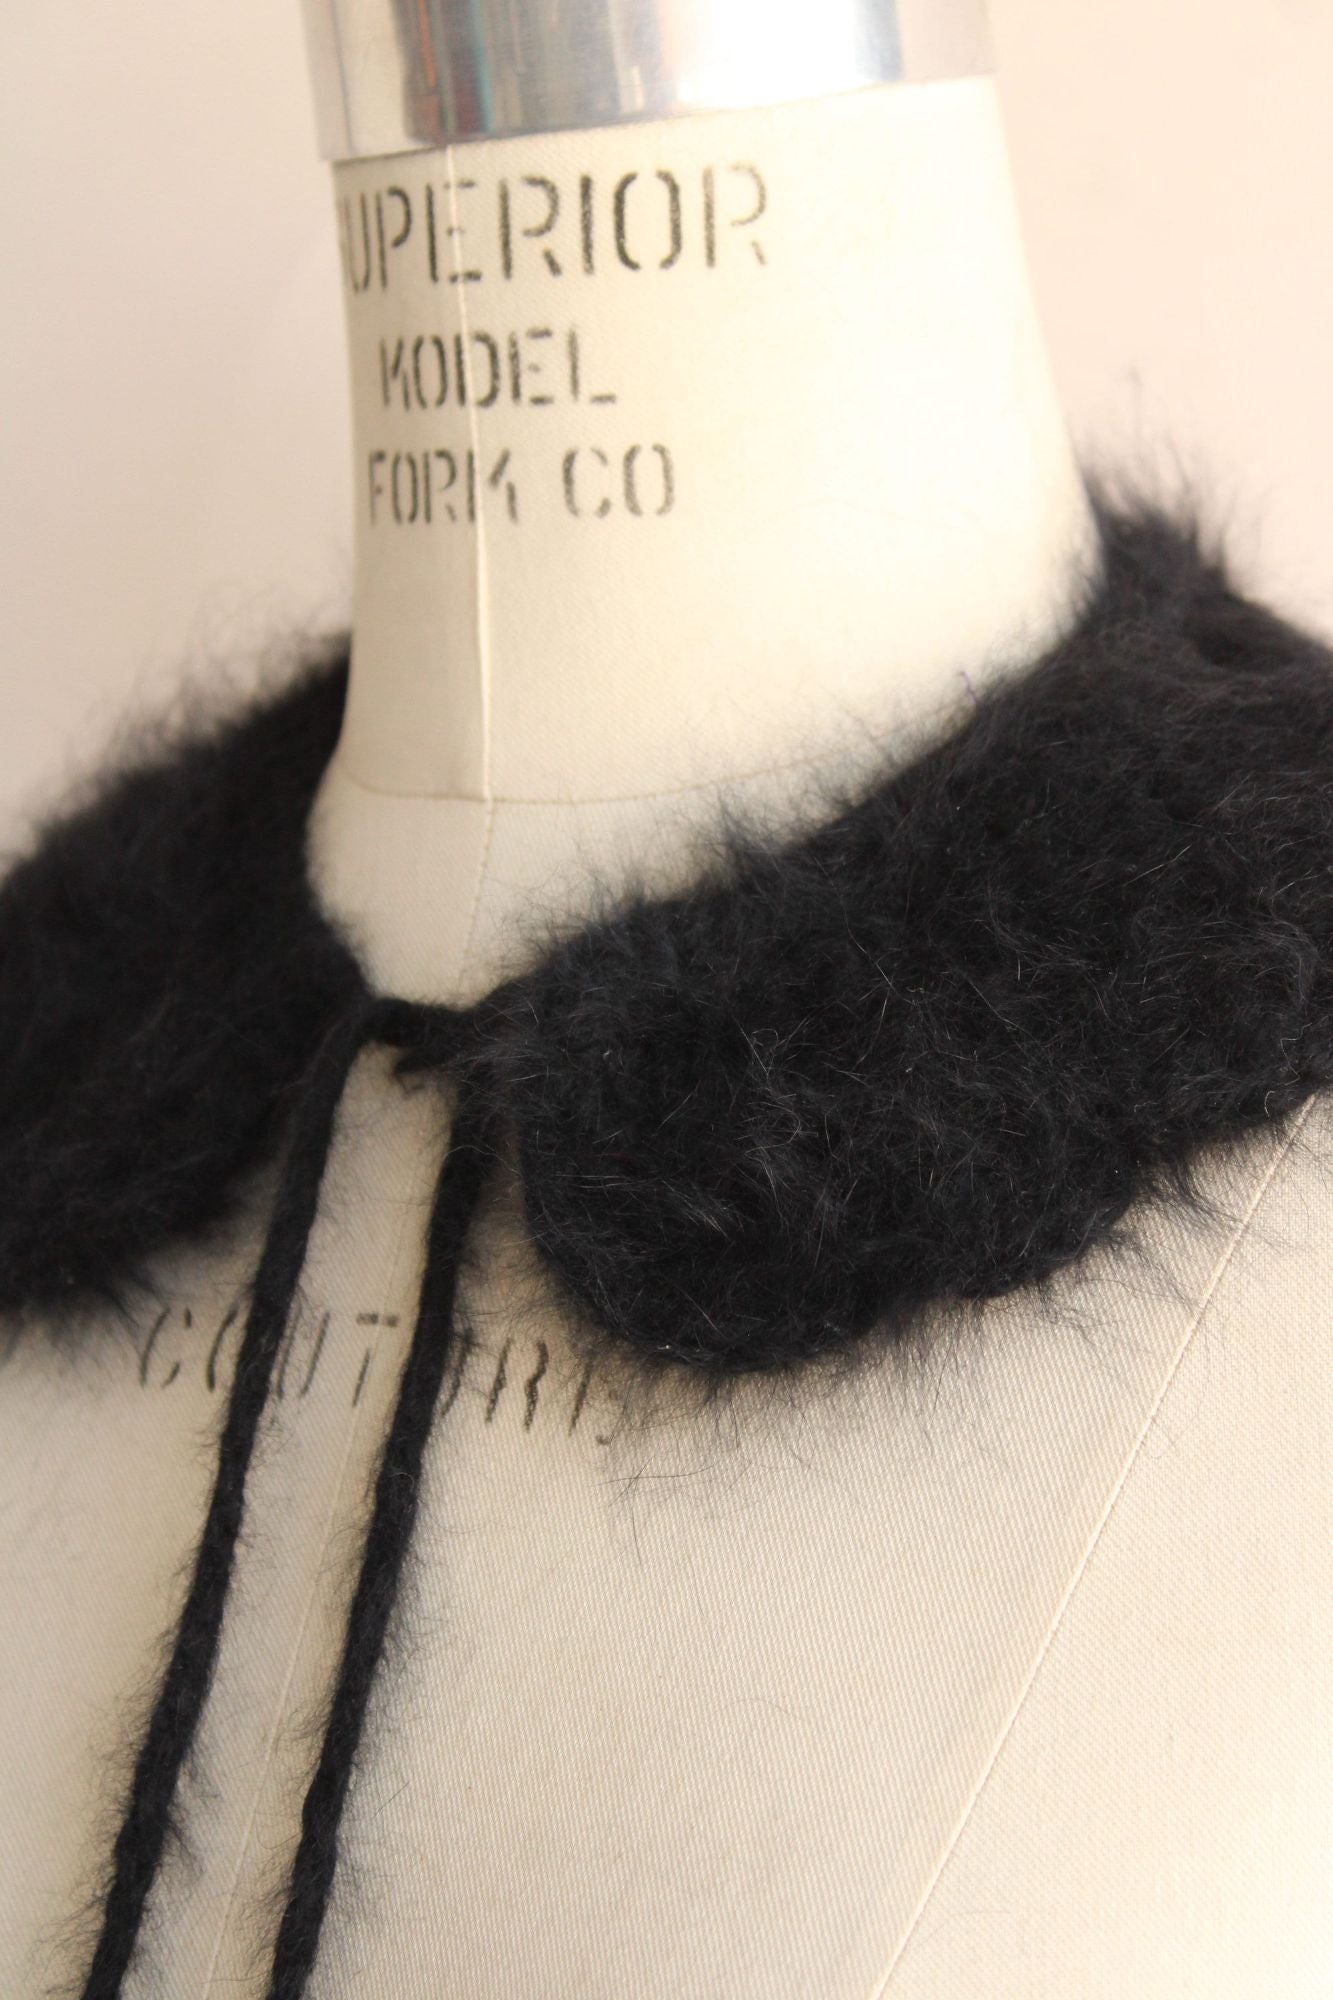 Vintage 1950s Black Knit Angora or Mohair Removable Collar With Tie